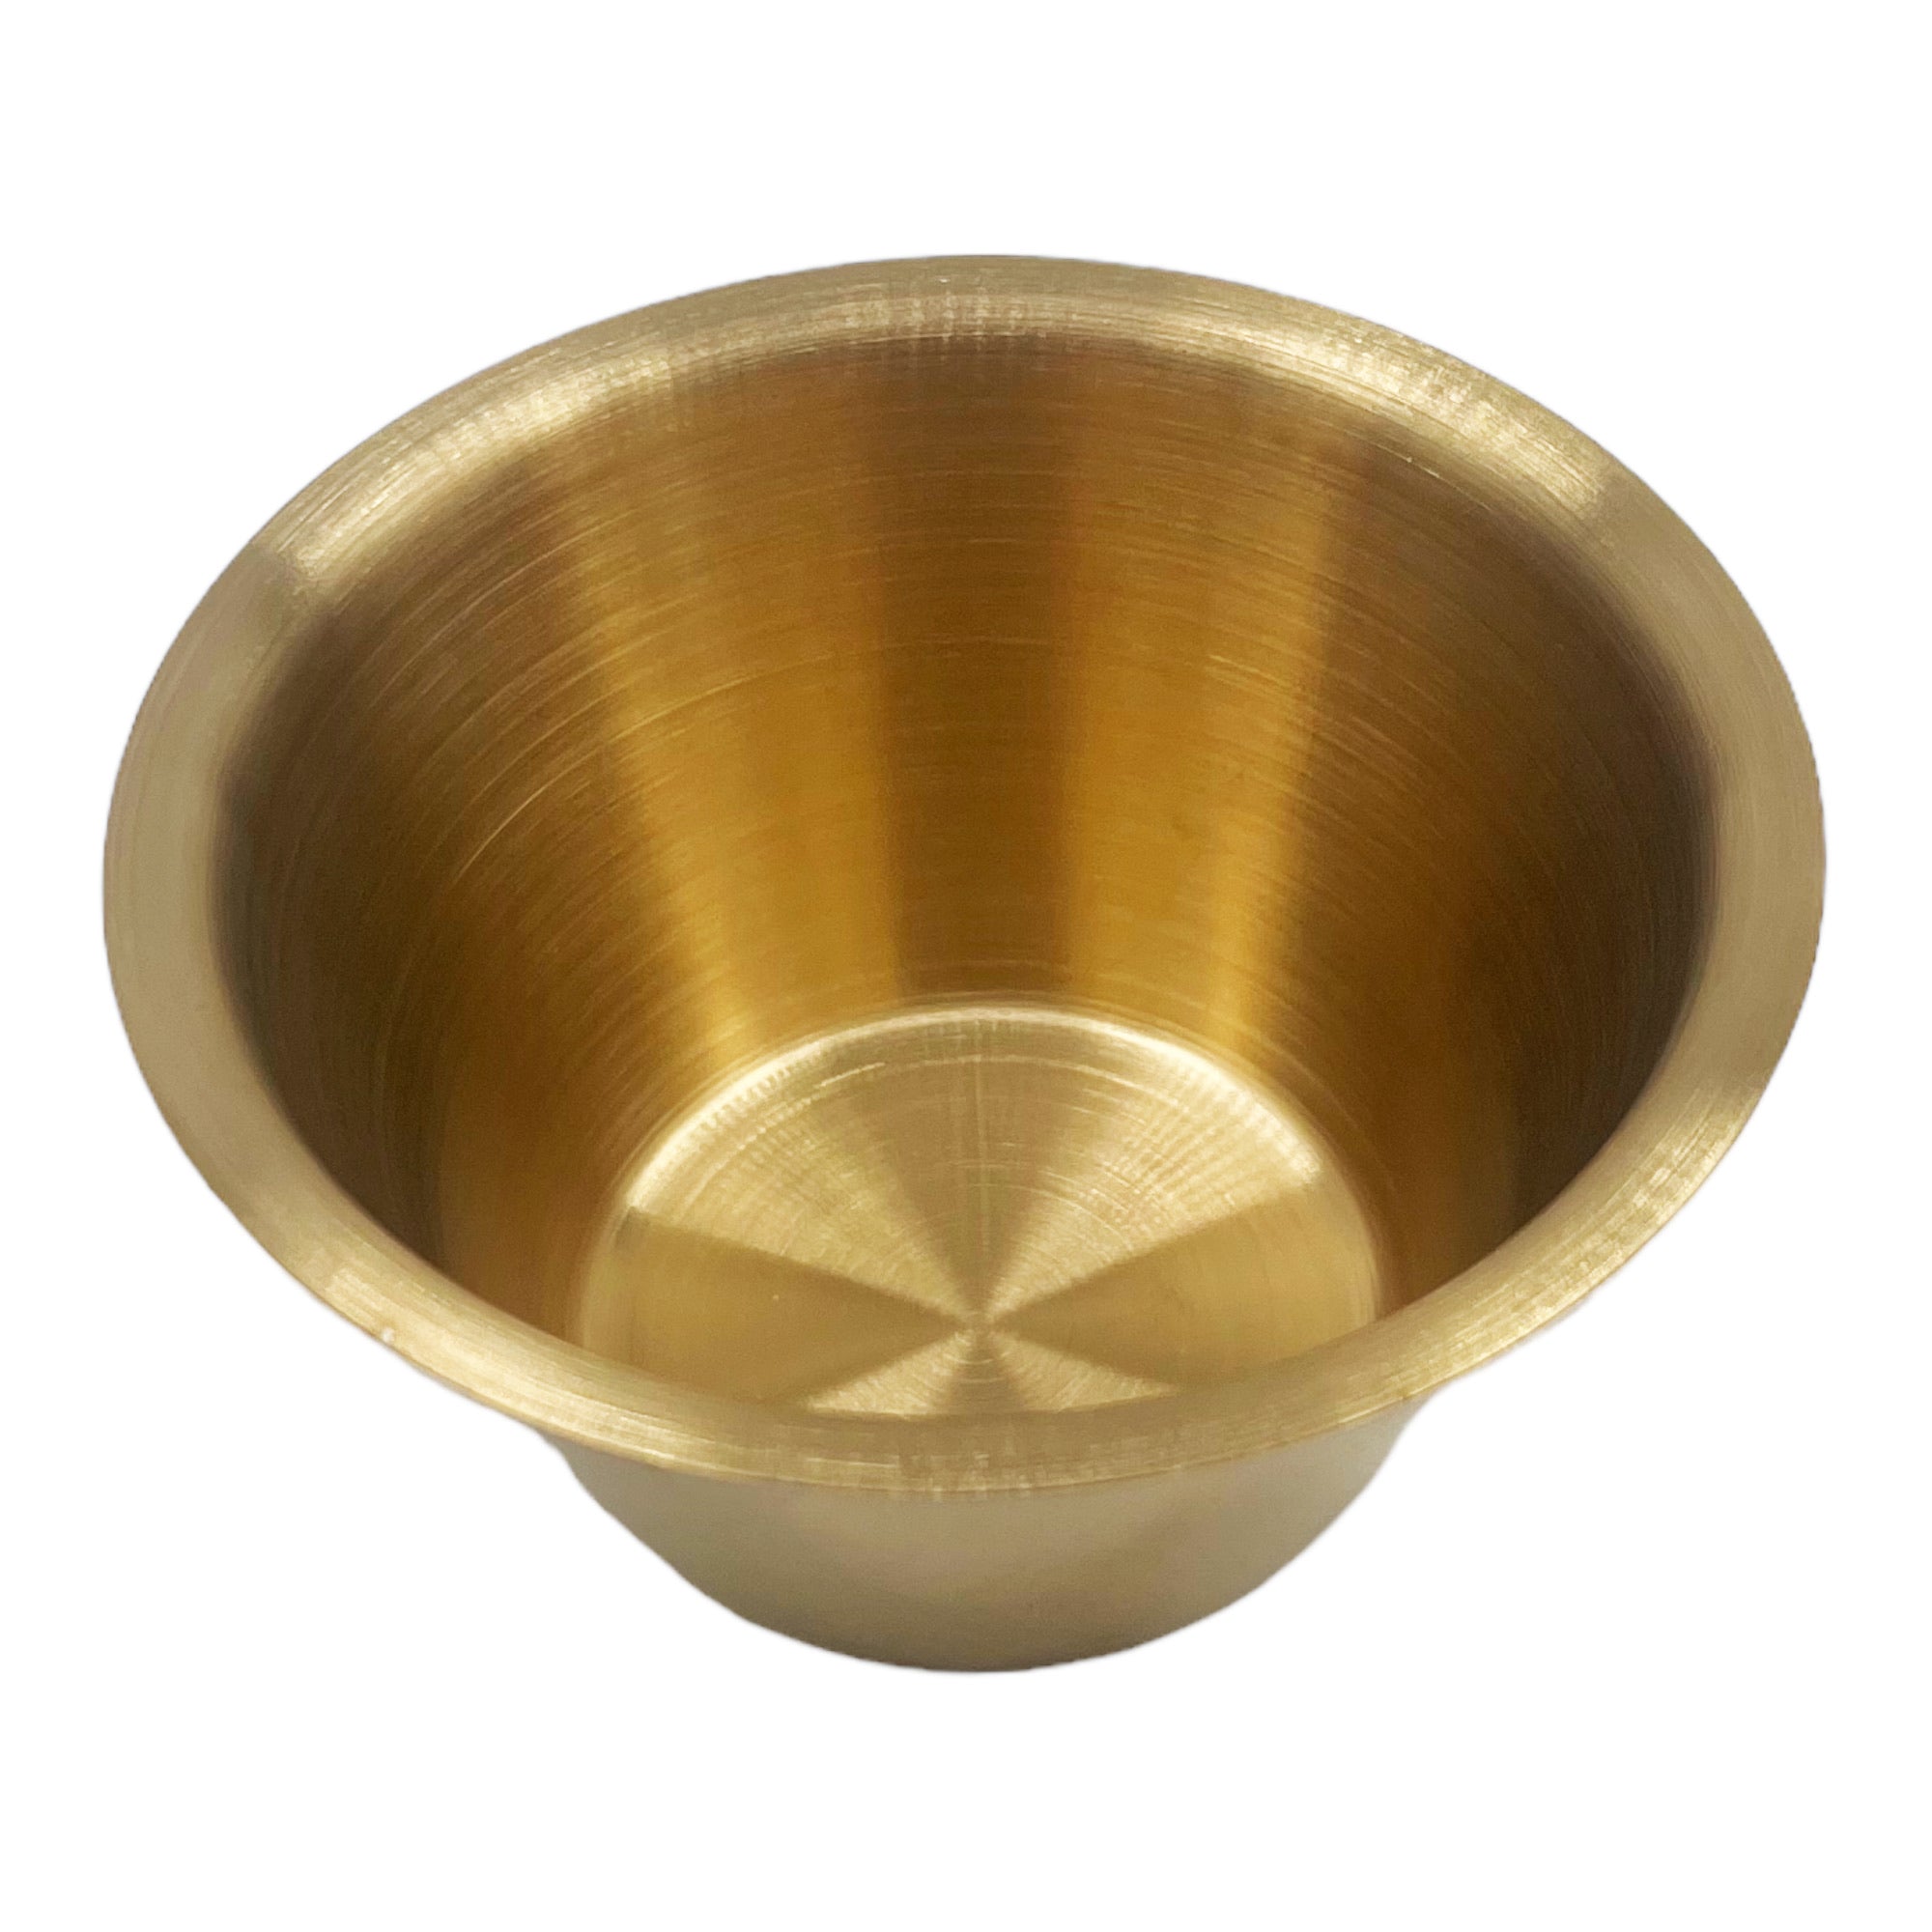 Eson - Stainless Steel Shaving Bowl Cup Gold 5.5x10cm - Eson Direct